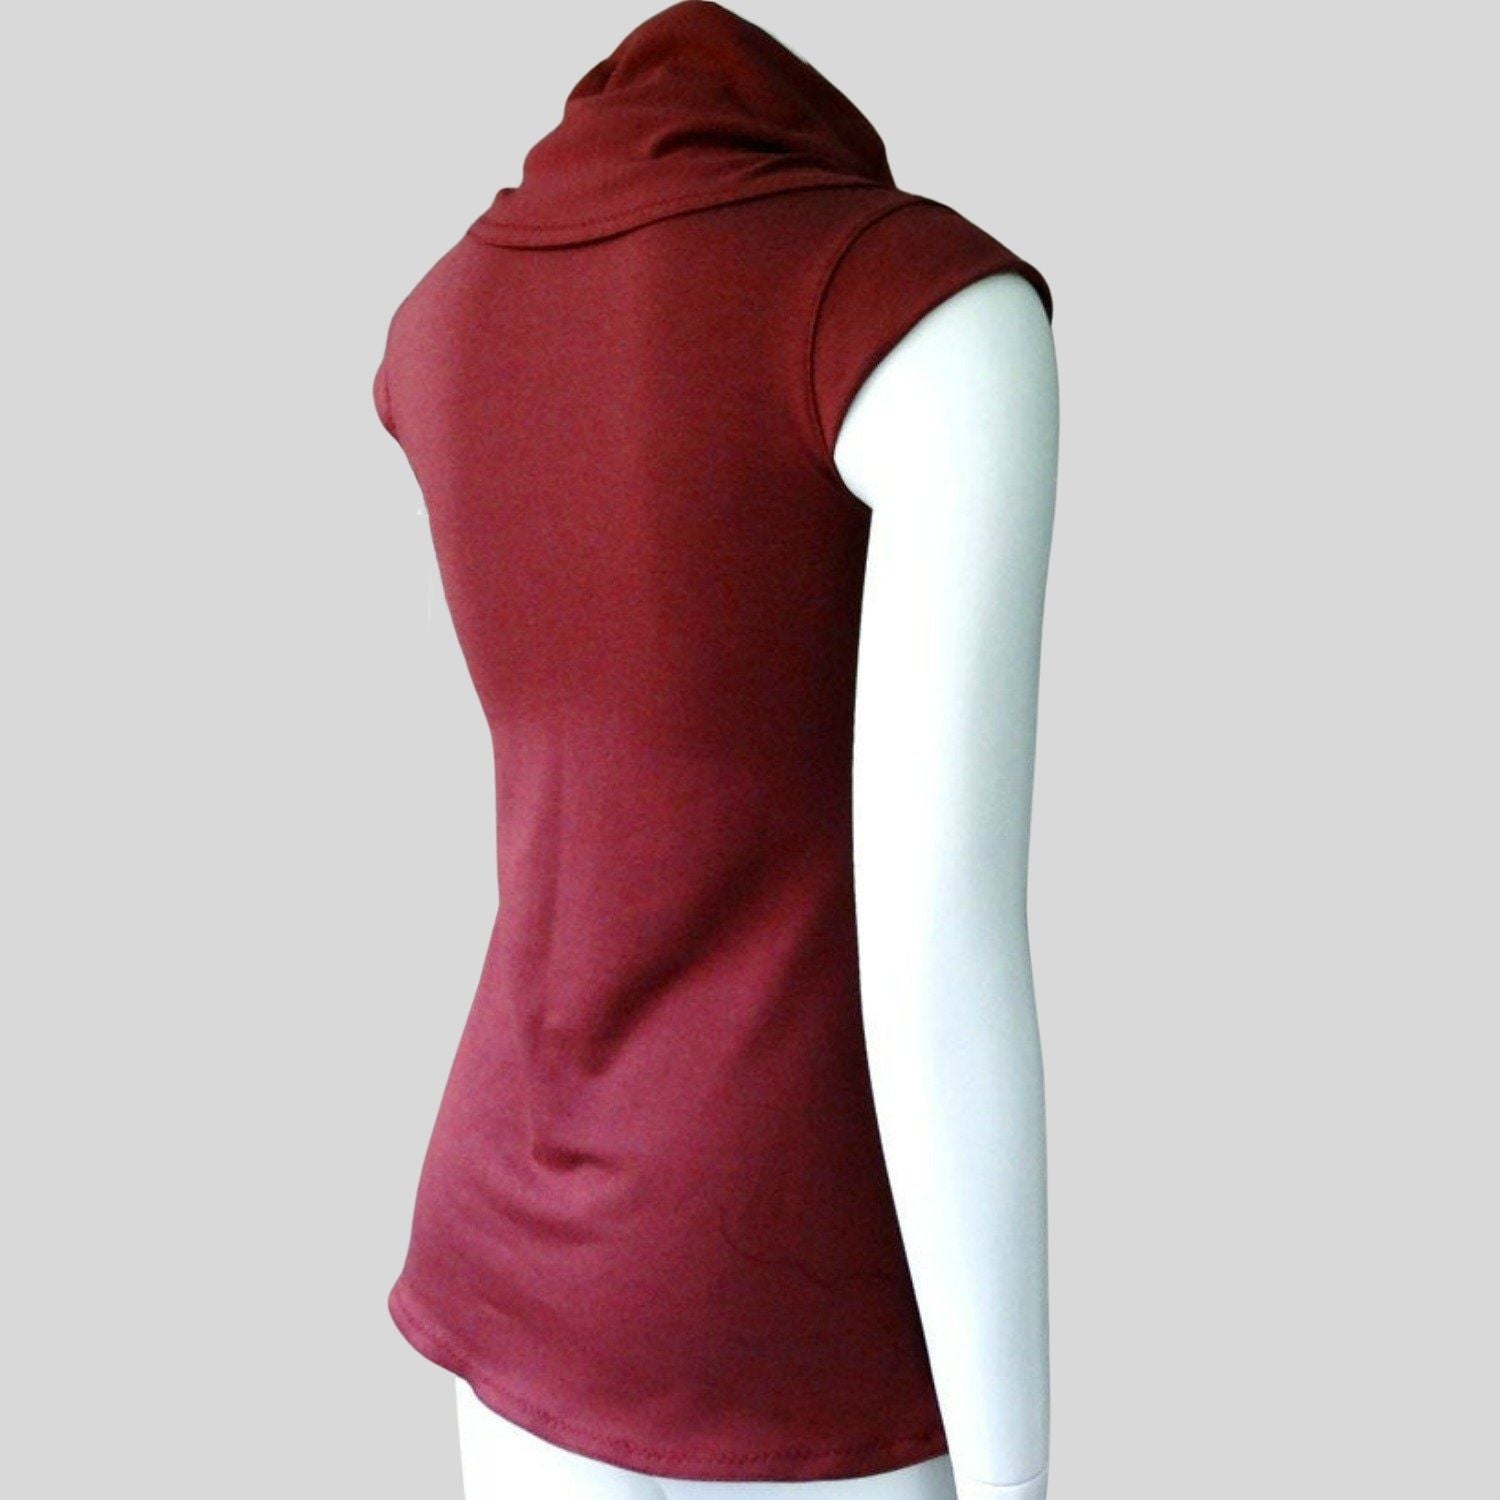 Canadian-made red organic cotton tunic top for women | Shop organic women's clothing made in Canada